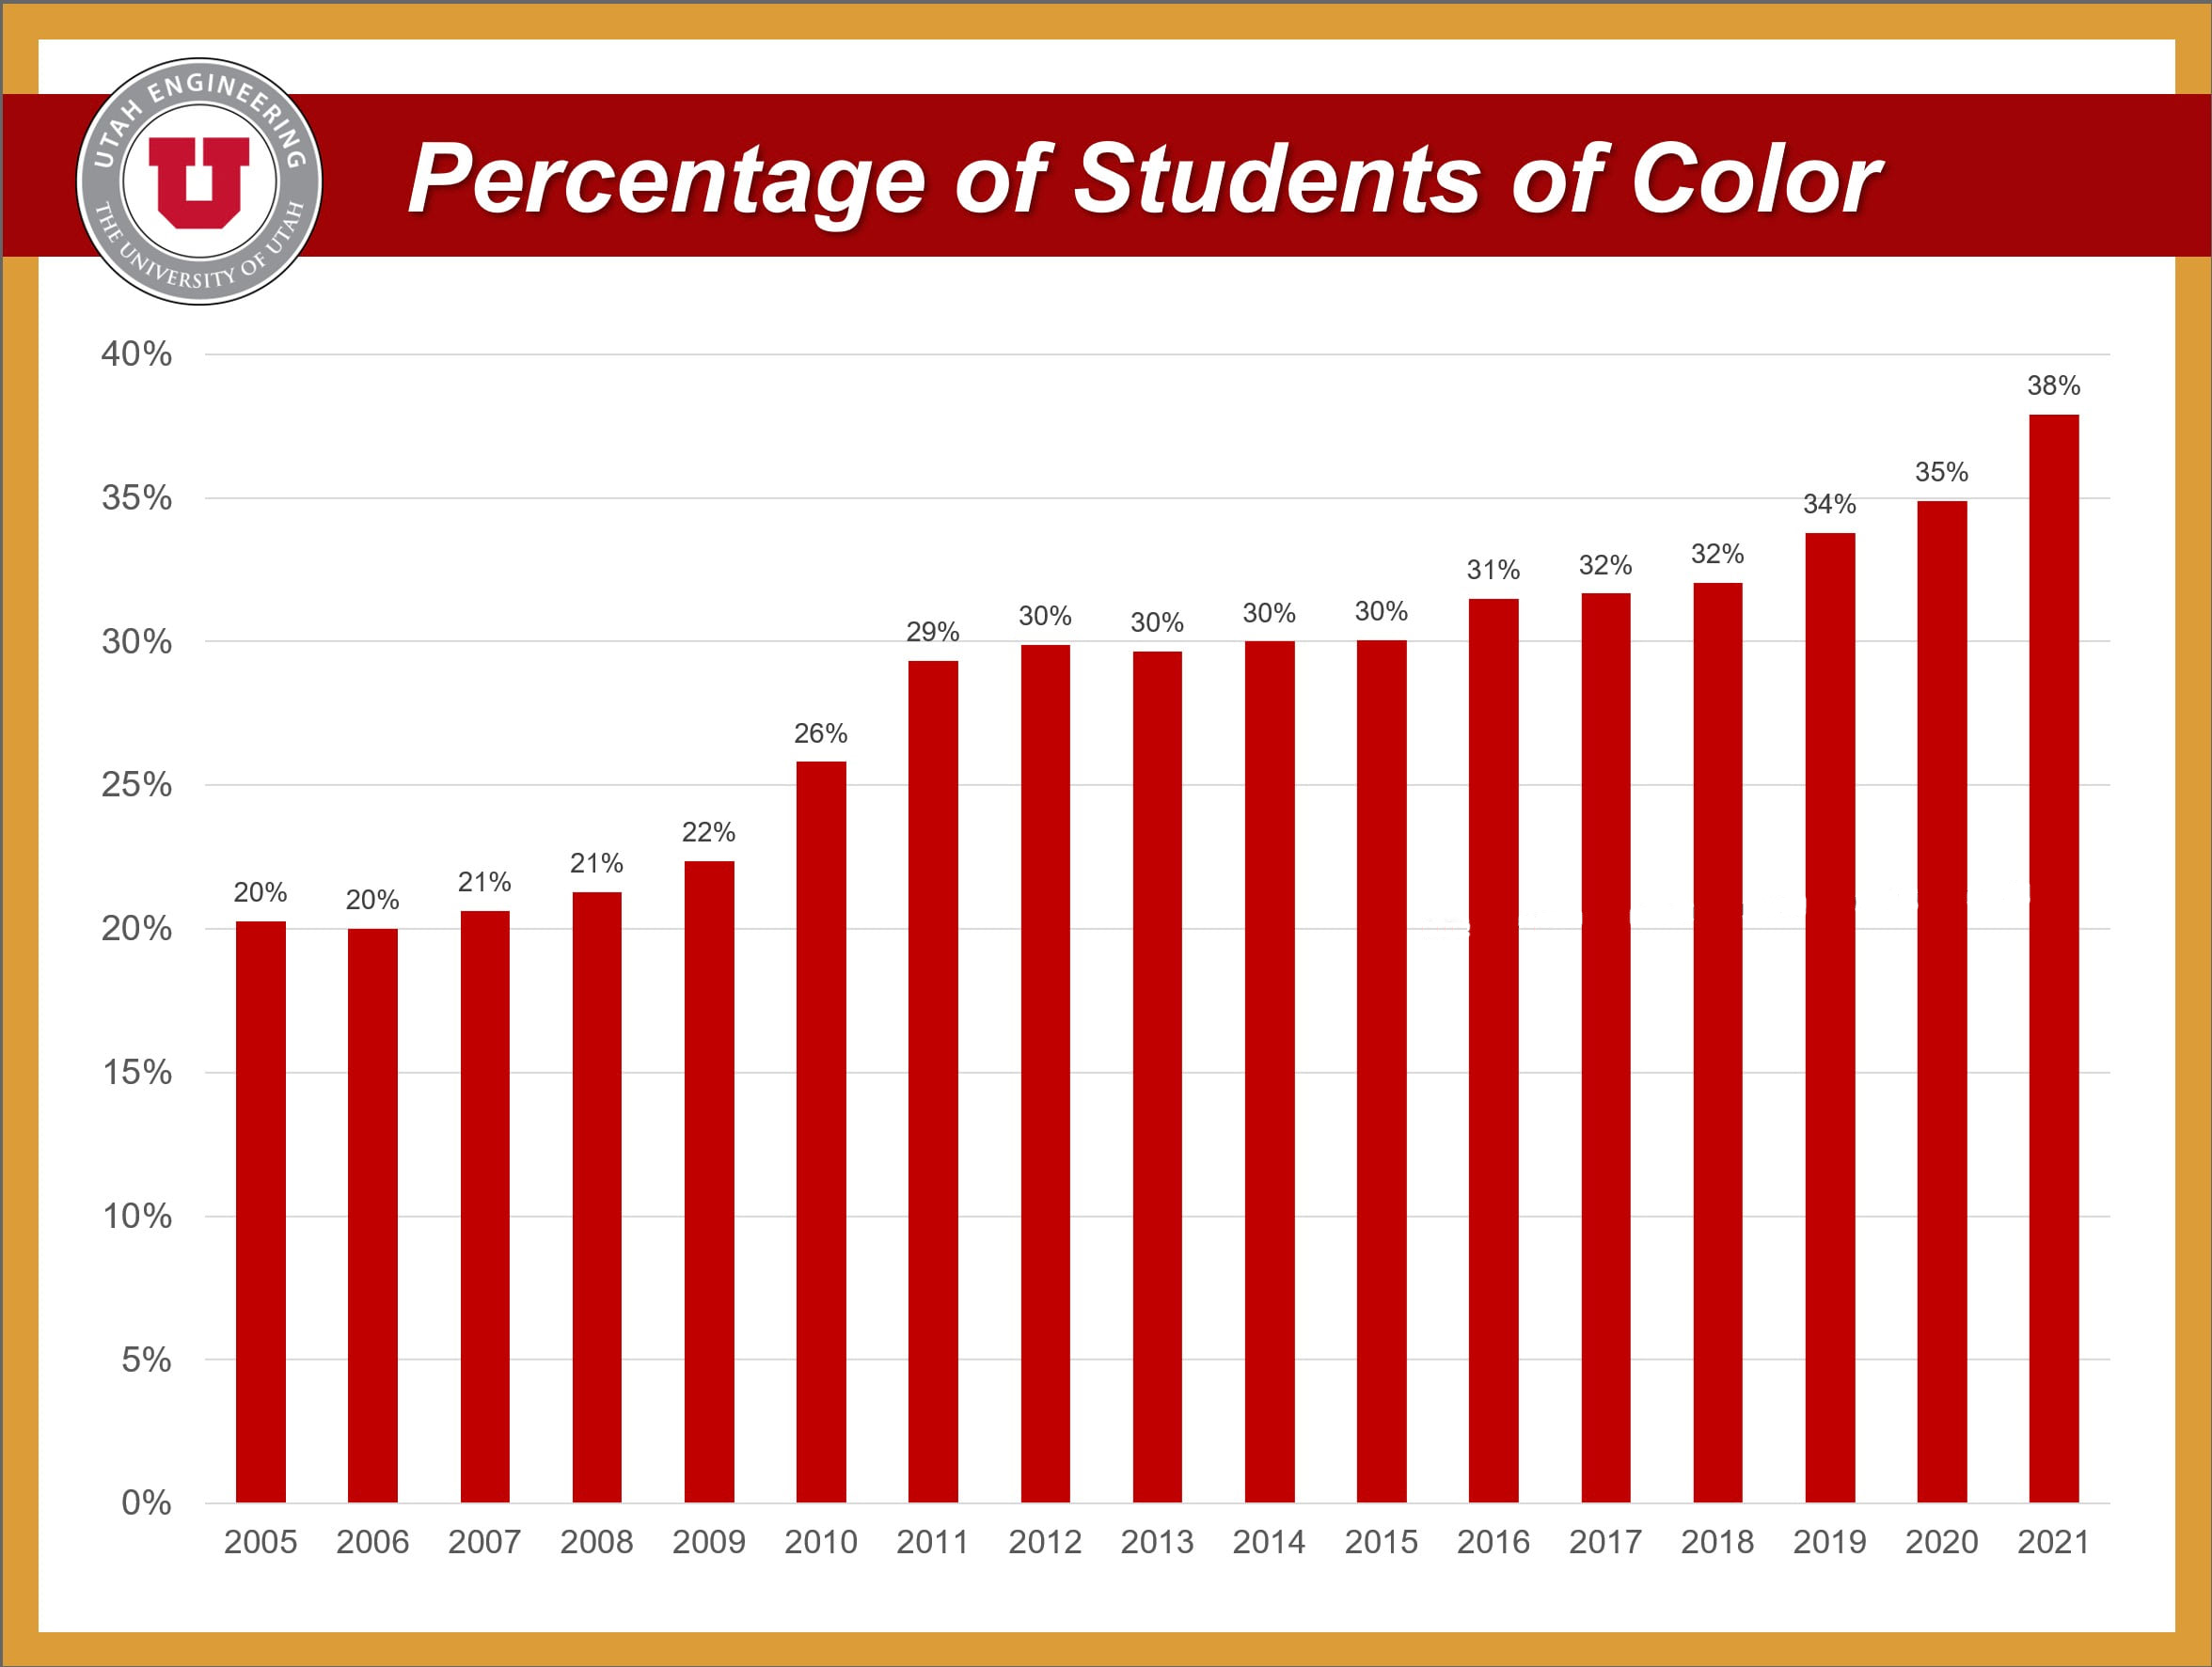 Graph showing the percentages of students of color within the college of engineering